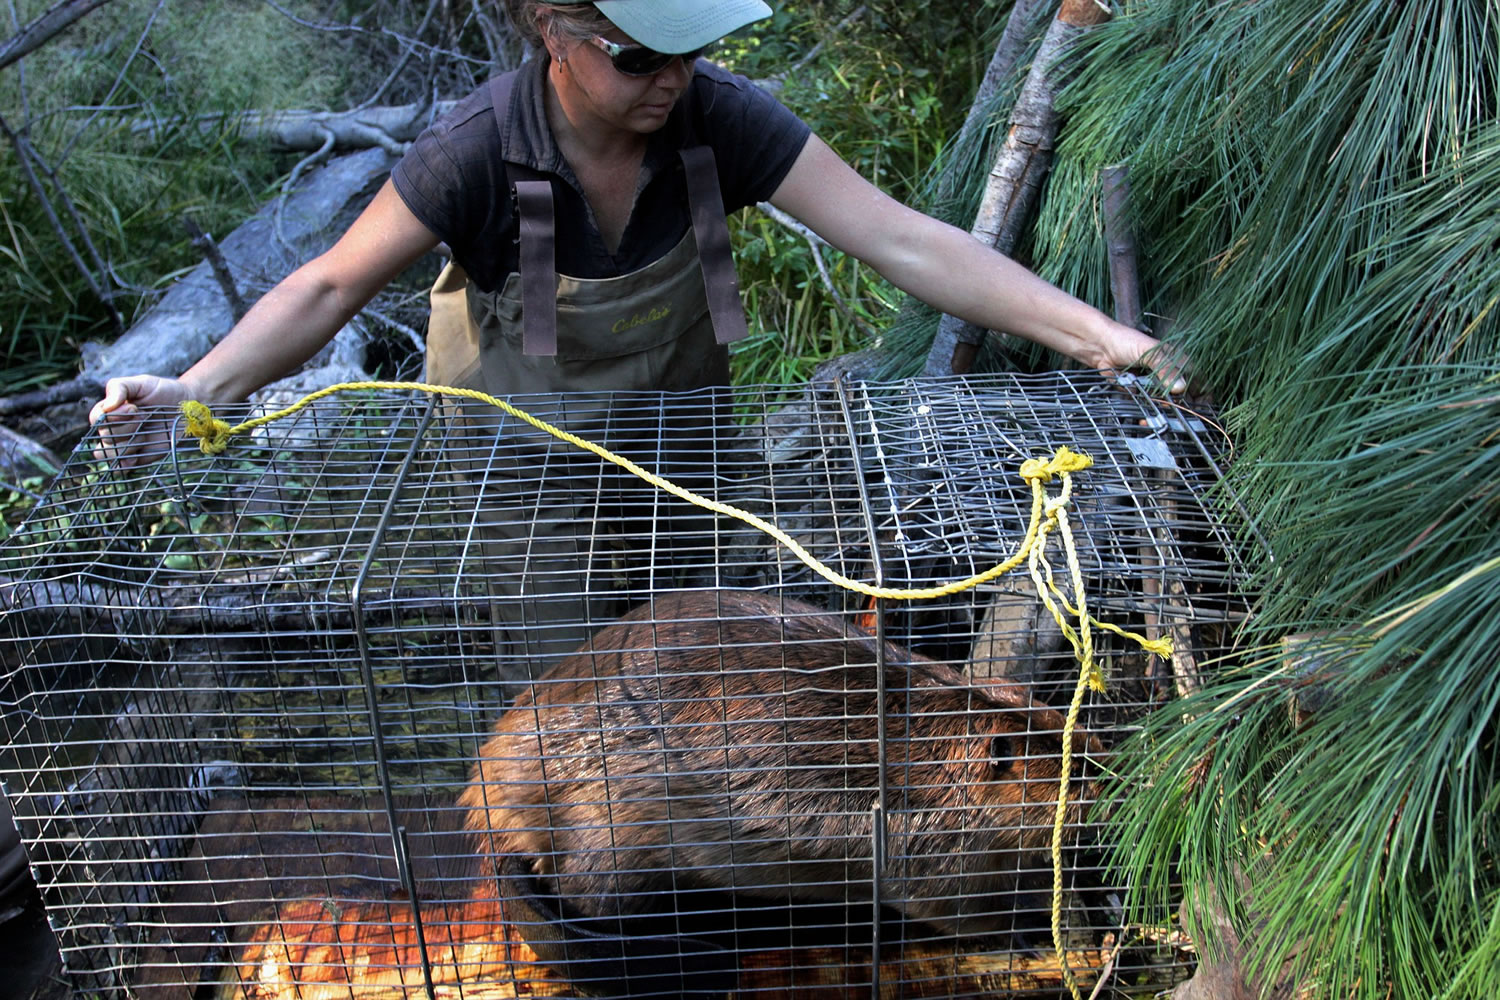 In this Sept. 12, 2014, photo, state biologist Kelly Perry attempts to coax a beaver into entering a man-made lodge during a relocation of a beaver family near Ellensburg, Wash. Under a program in central Washington, nuisance beavers are being trapped and relocated to the headwaters of the Yakima River where biologists hope their dams help restore water systems used by salmon, other animals and people.